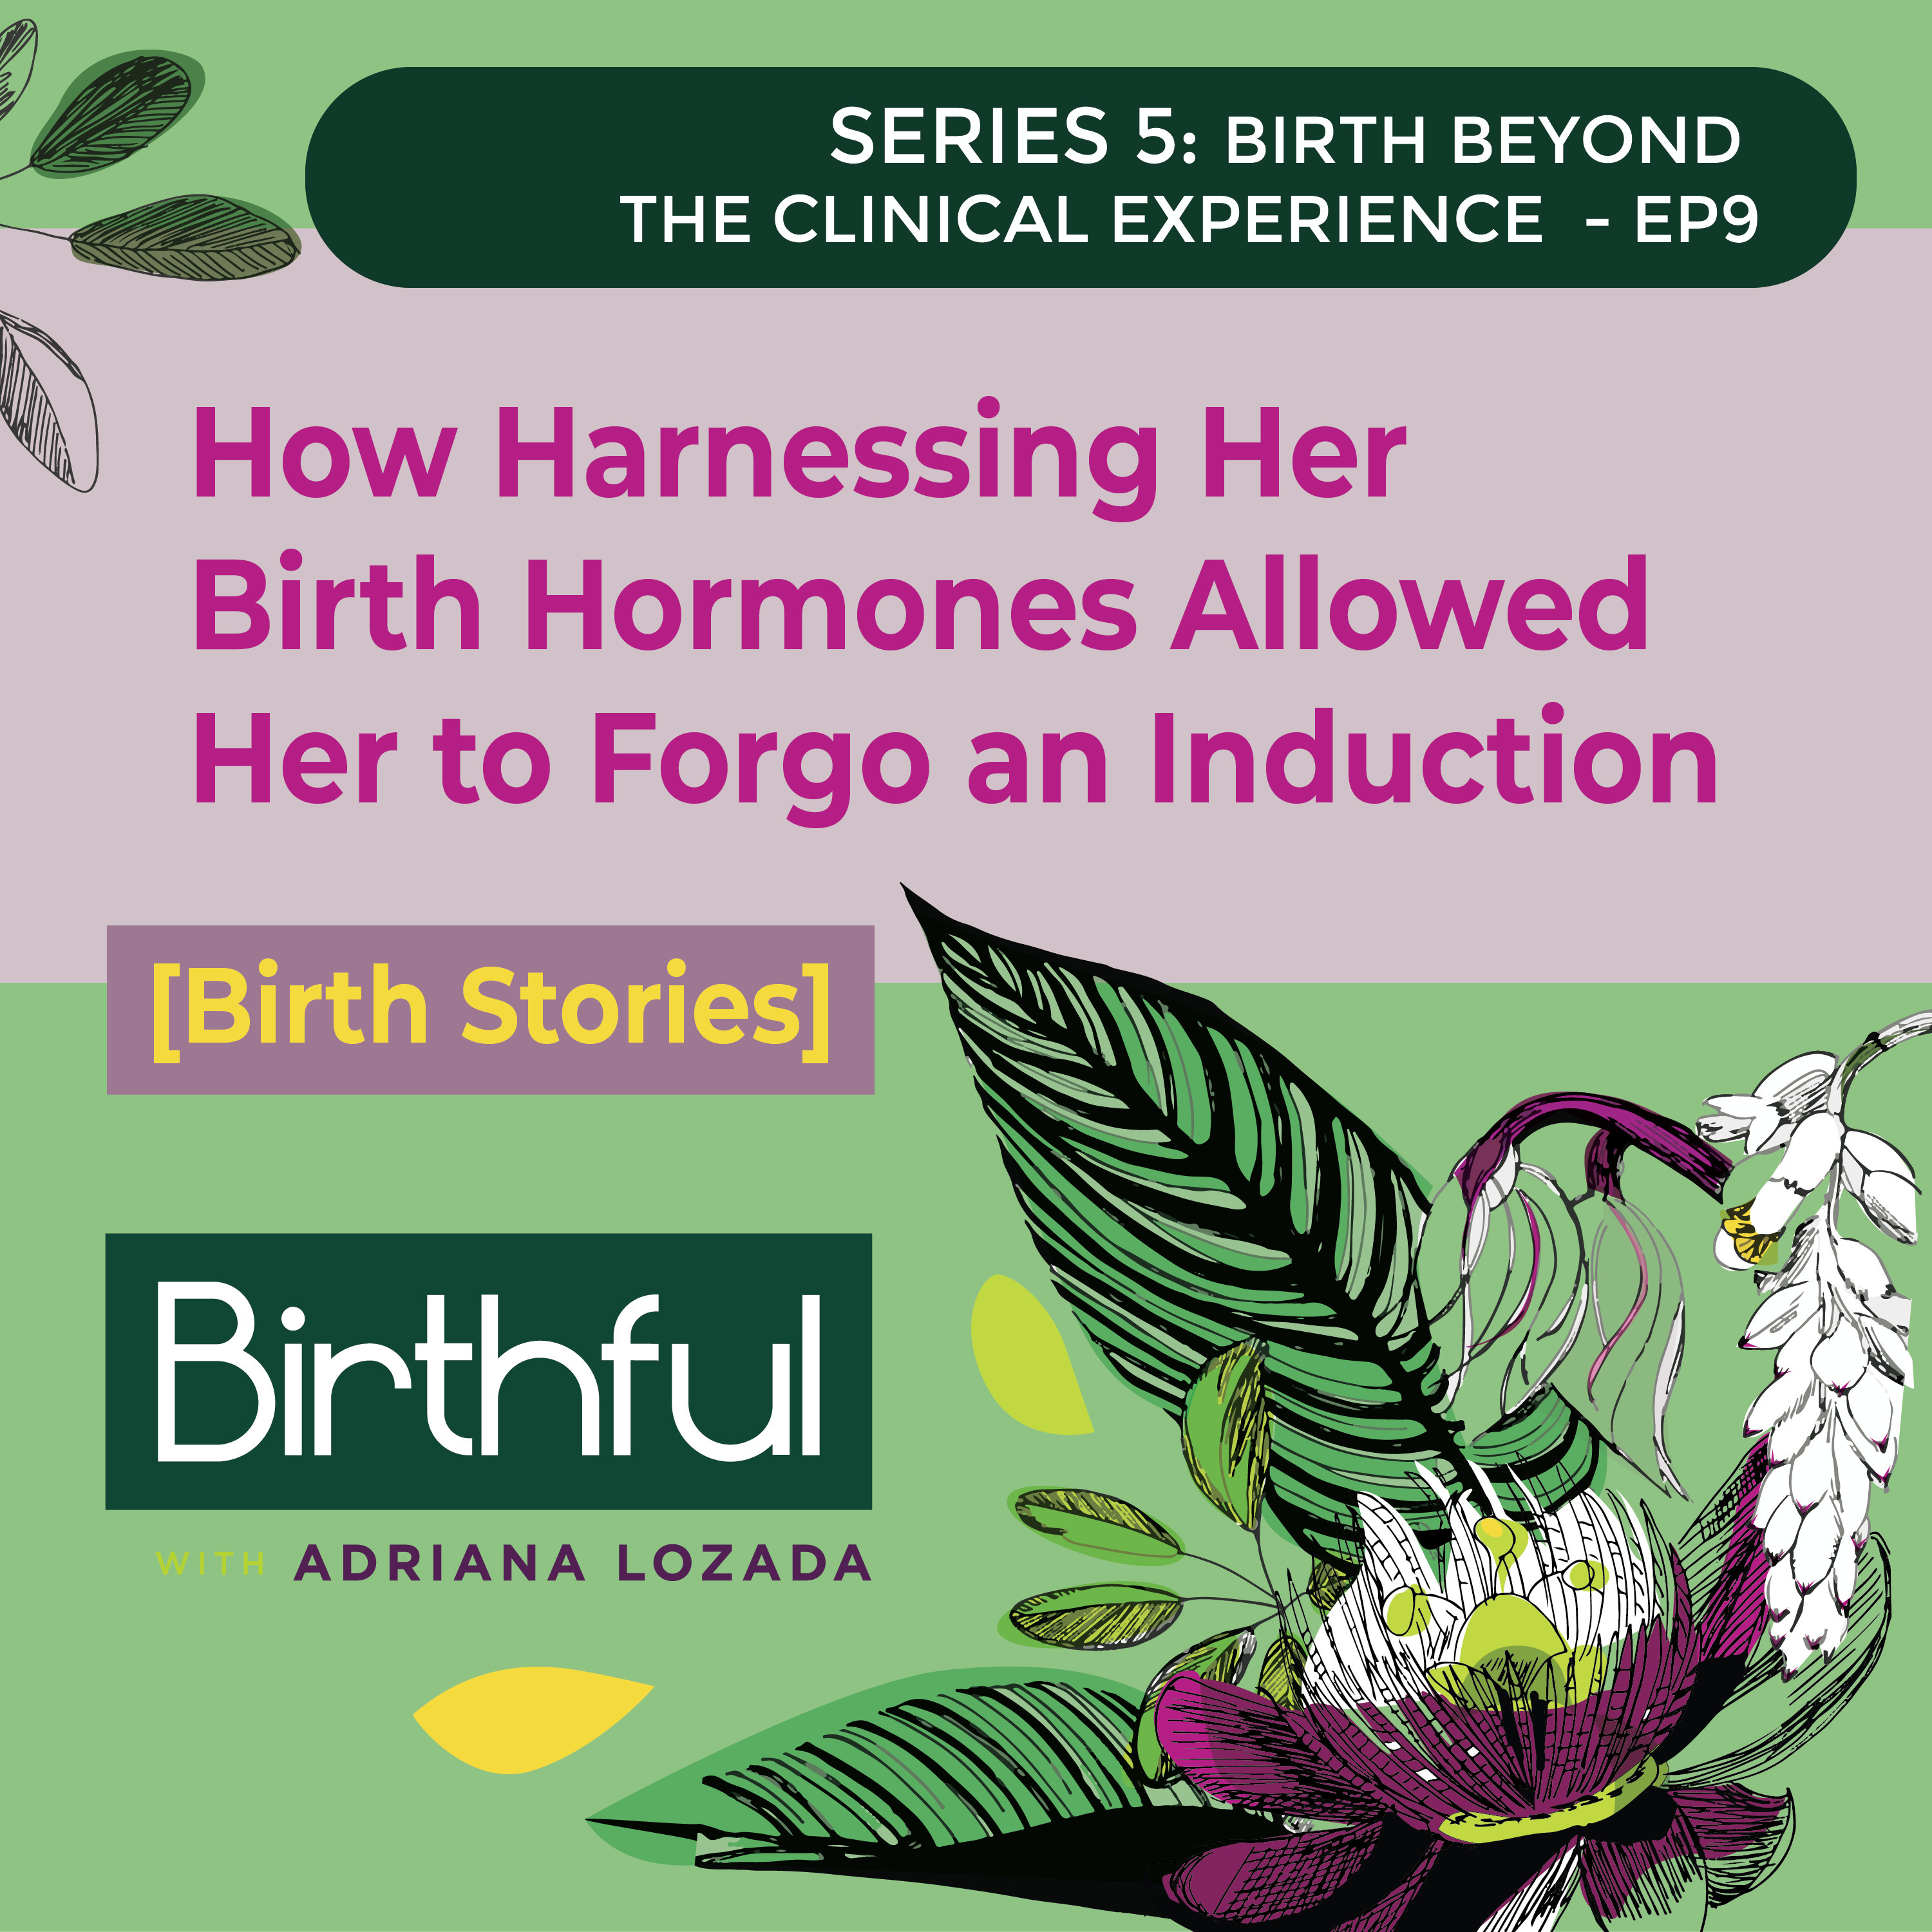 [Birth Story] How Harnessing Her Birth Hormones Allowed Her to Forgo an Induction